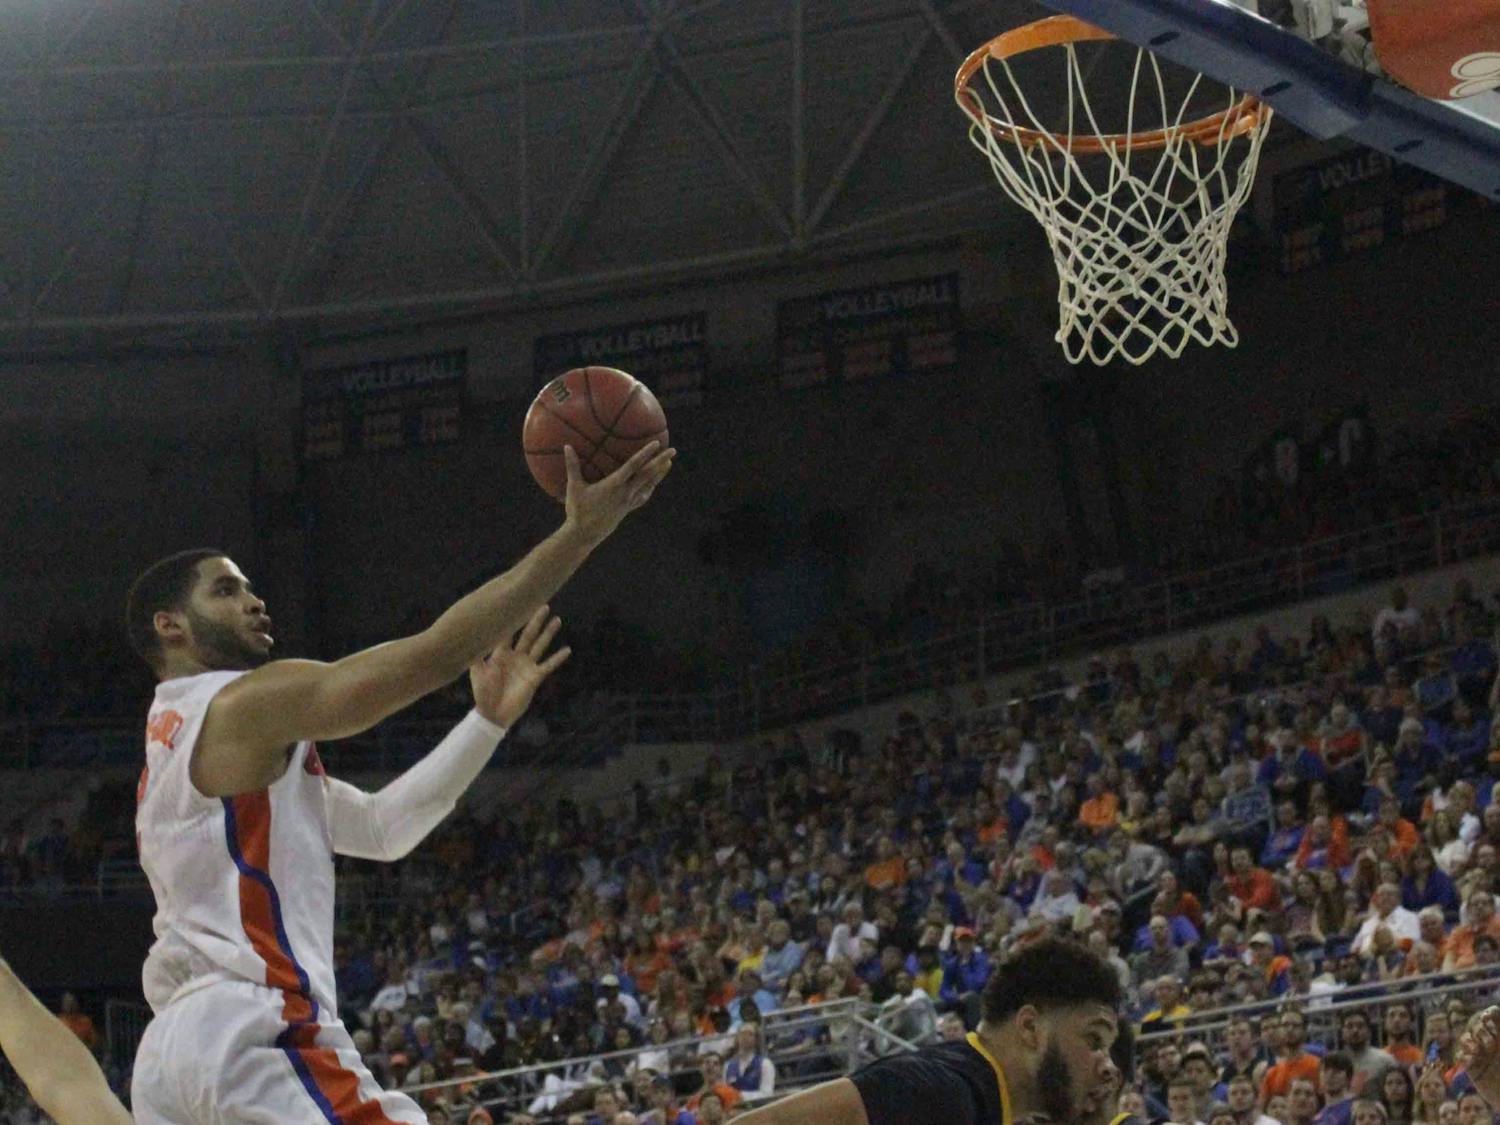 Brandone Francis-Ramirez goes for a layup during Florida’s win over West Virginia on Jan. 30, 2016, in the O’Connell Center.